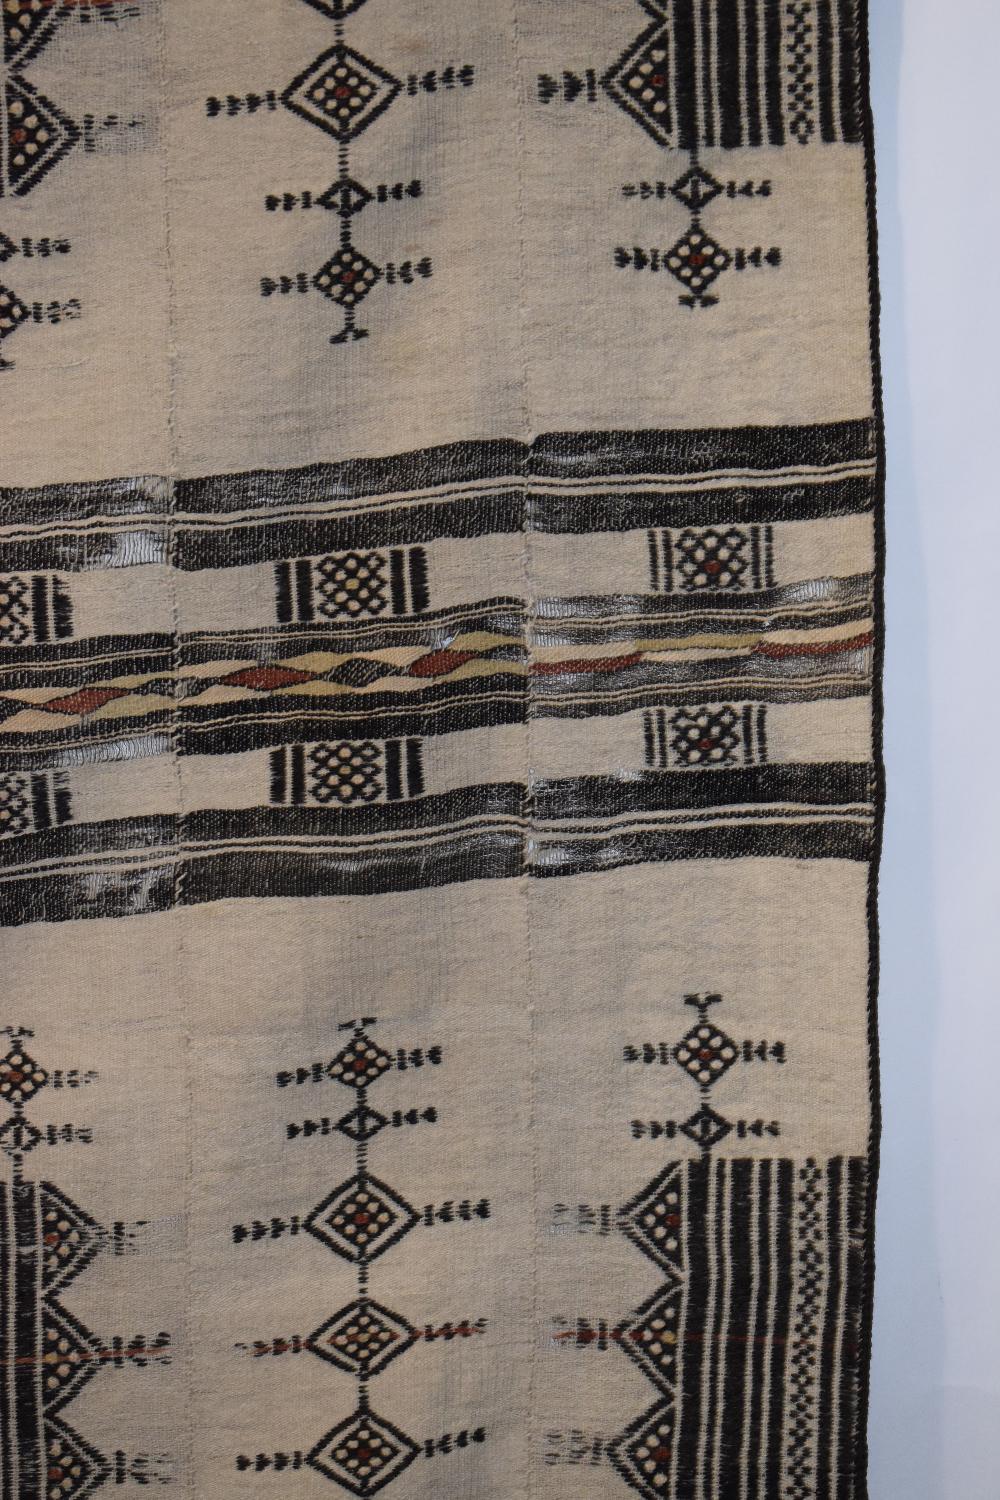 Fulani blanket, Mali, west Africa, second half 20th century, 97in. X 50in. 247cm. X 127cm. Some - Image 3 of 13